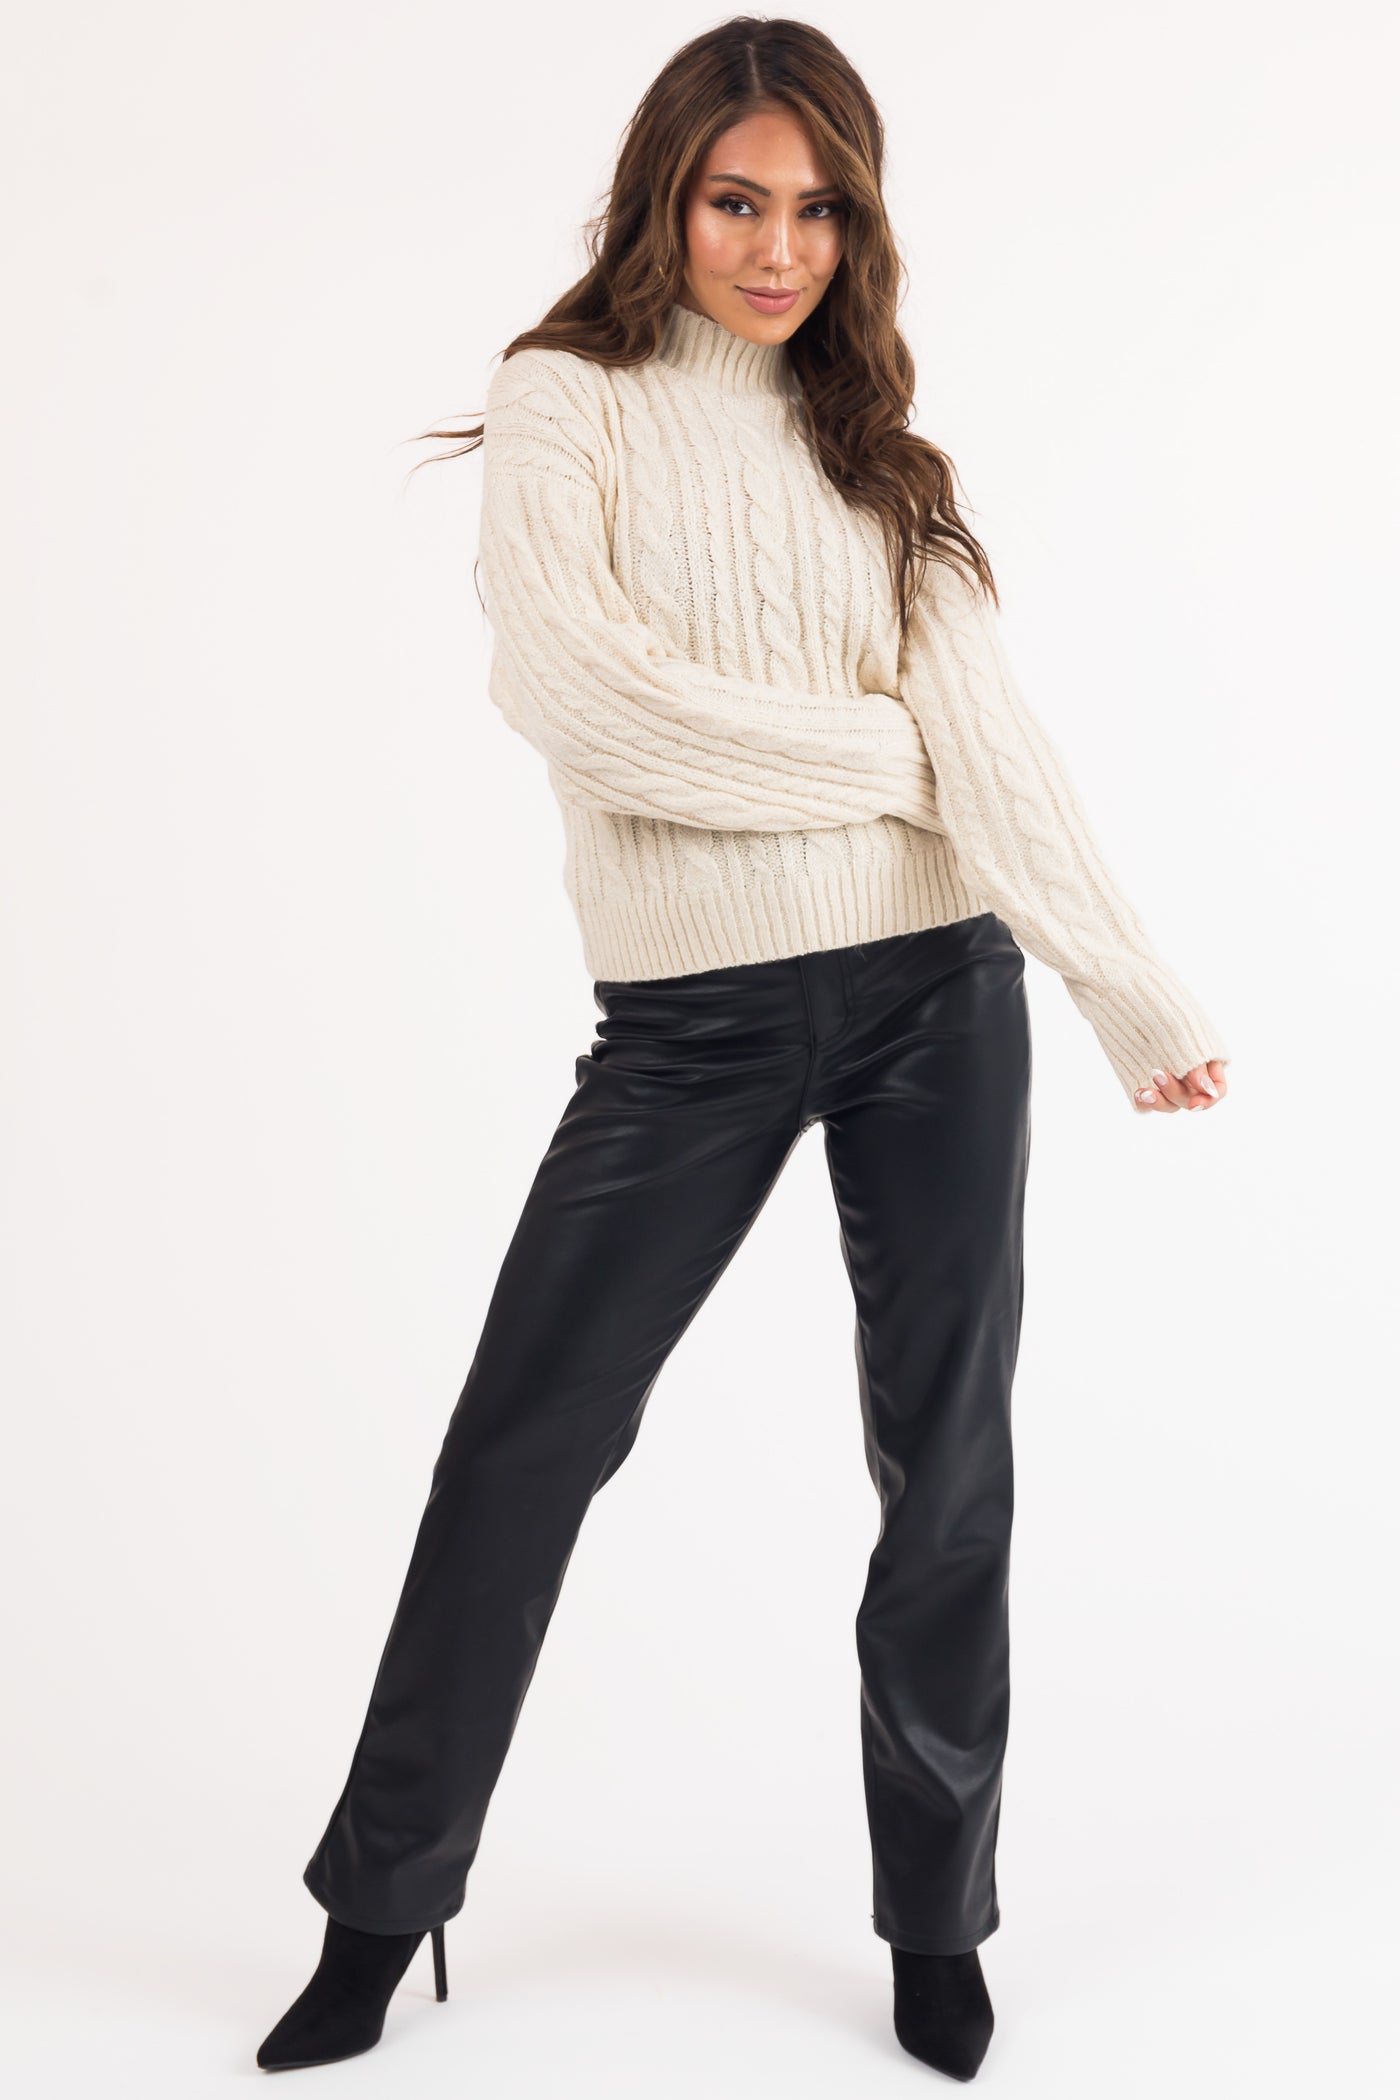 Ivory High Neck Cable Knit Sweater